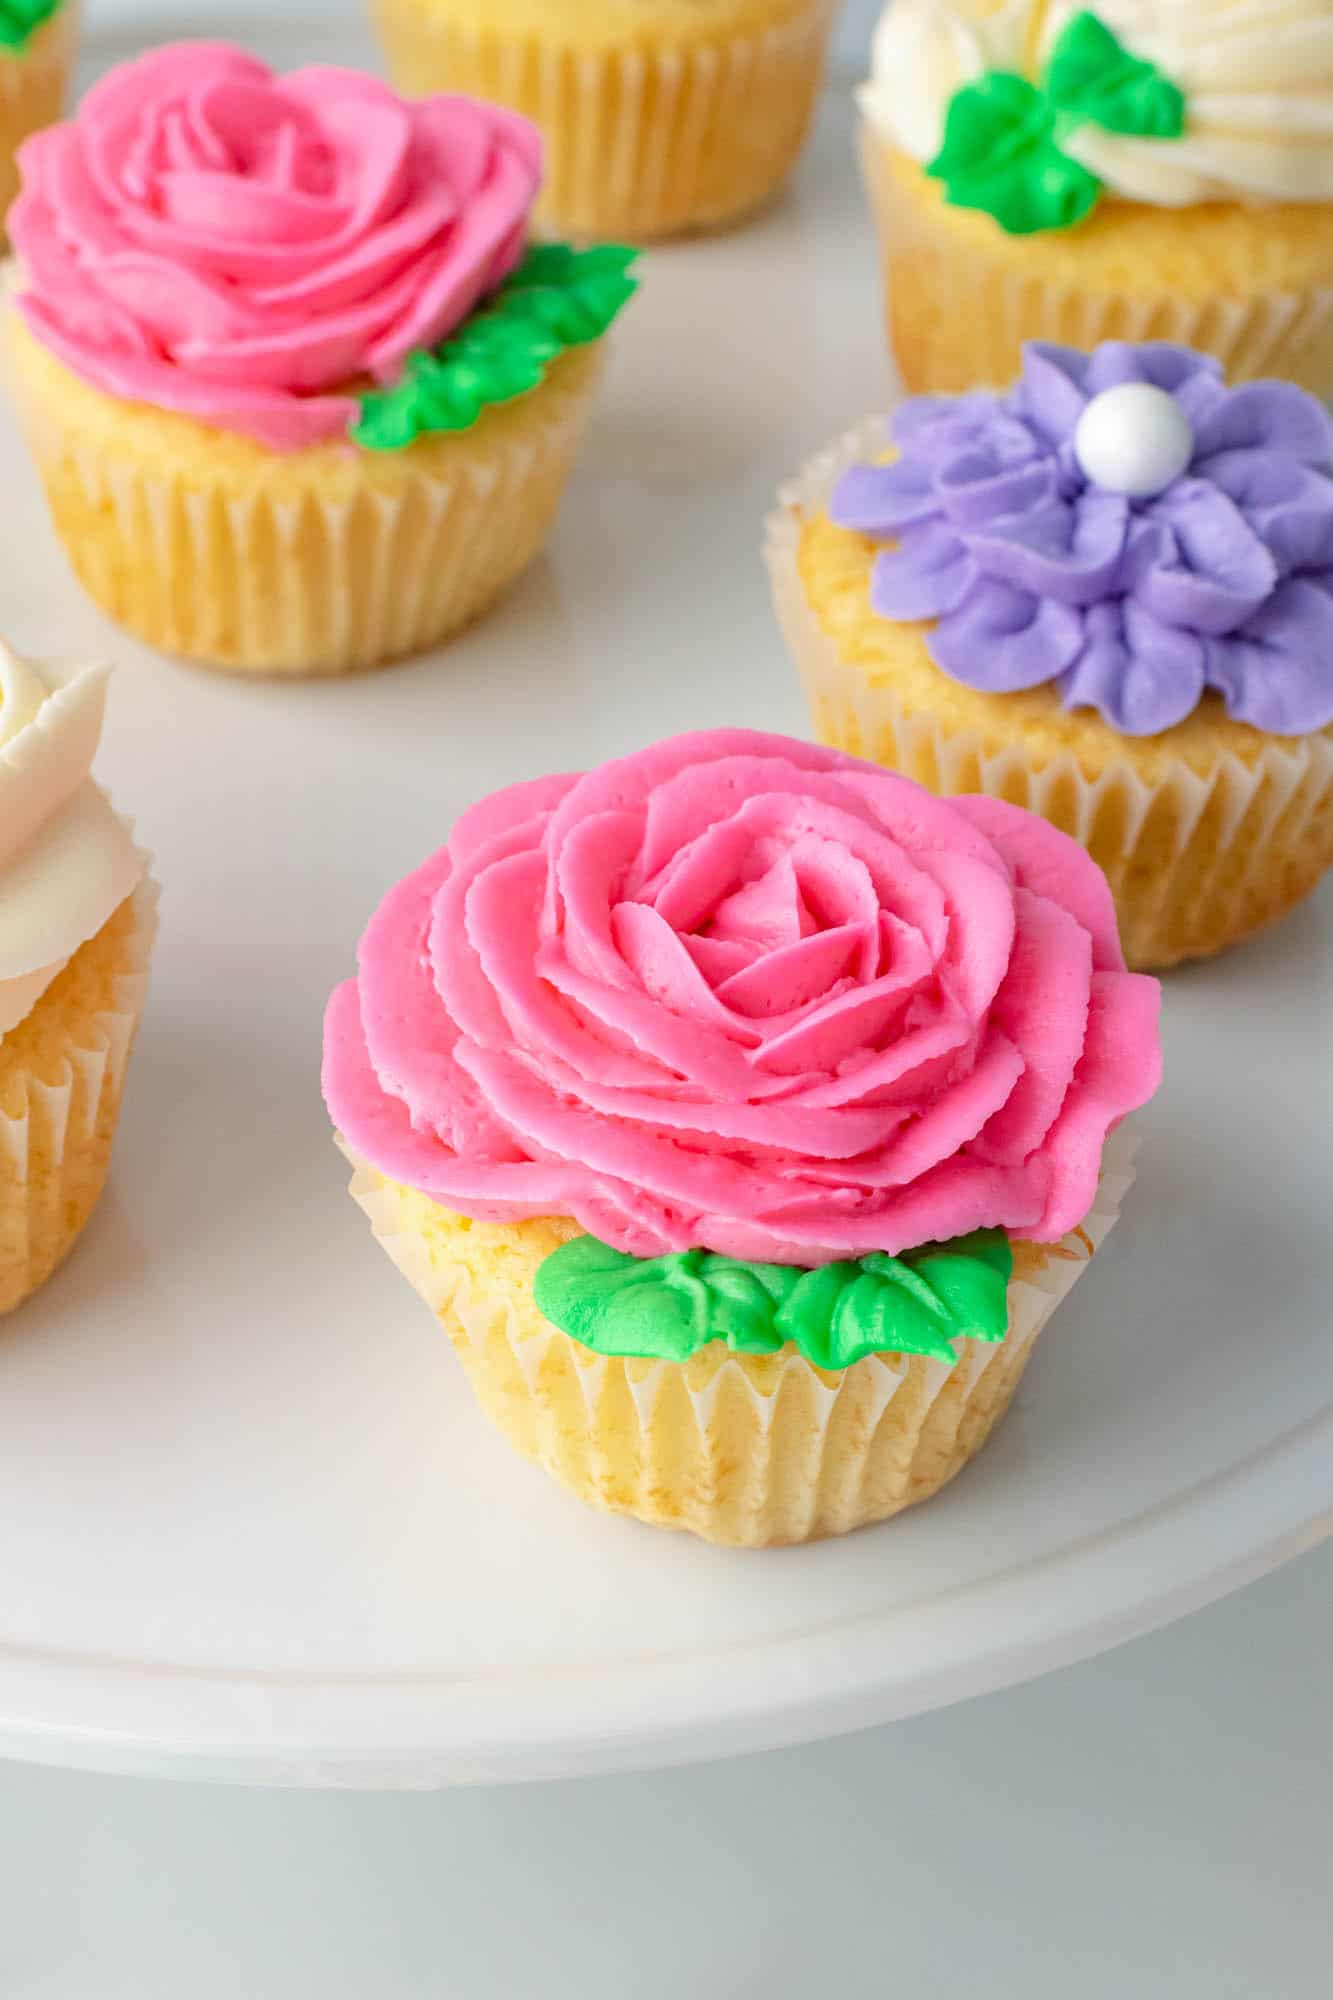 Cupcake with a buttercream rose piped onto it, with green leaves on the side. And more flower cupcakes in the background.